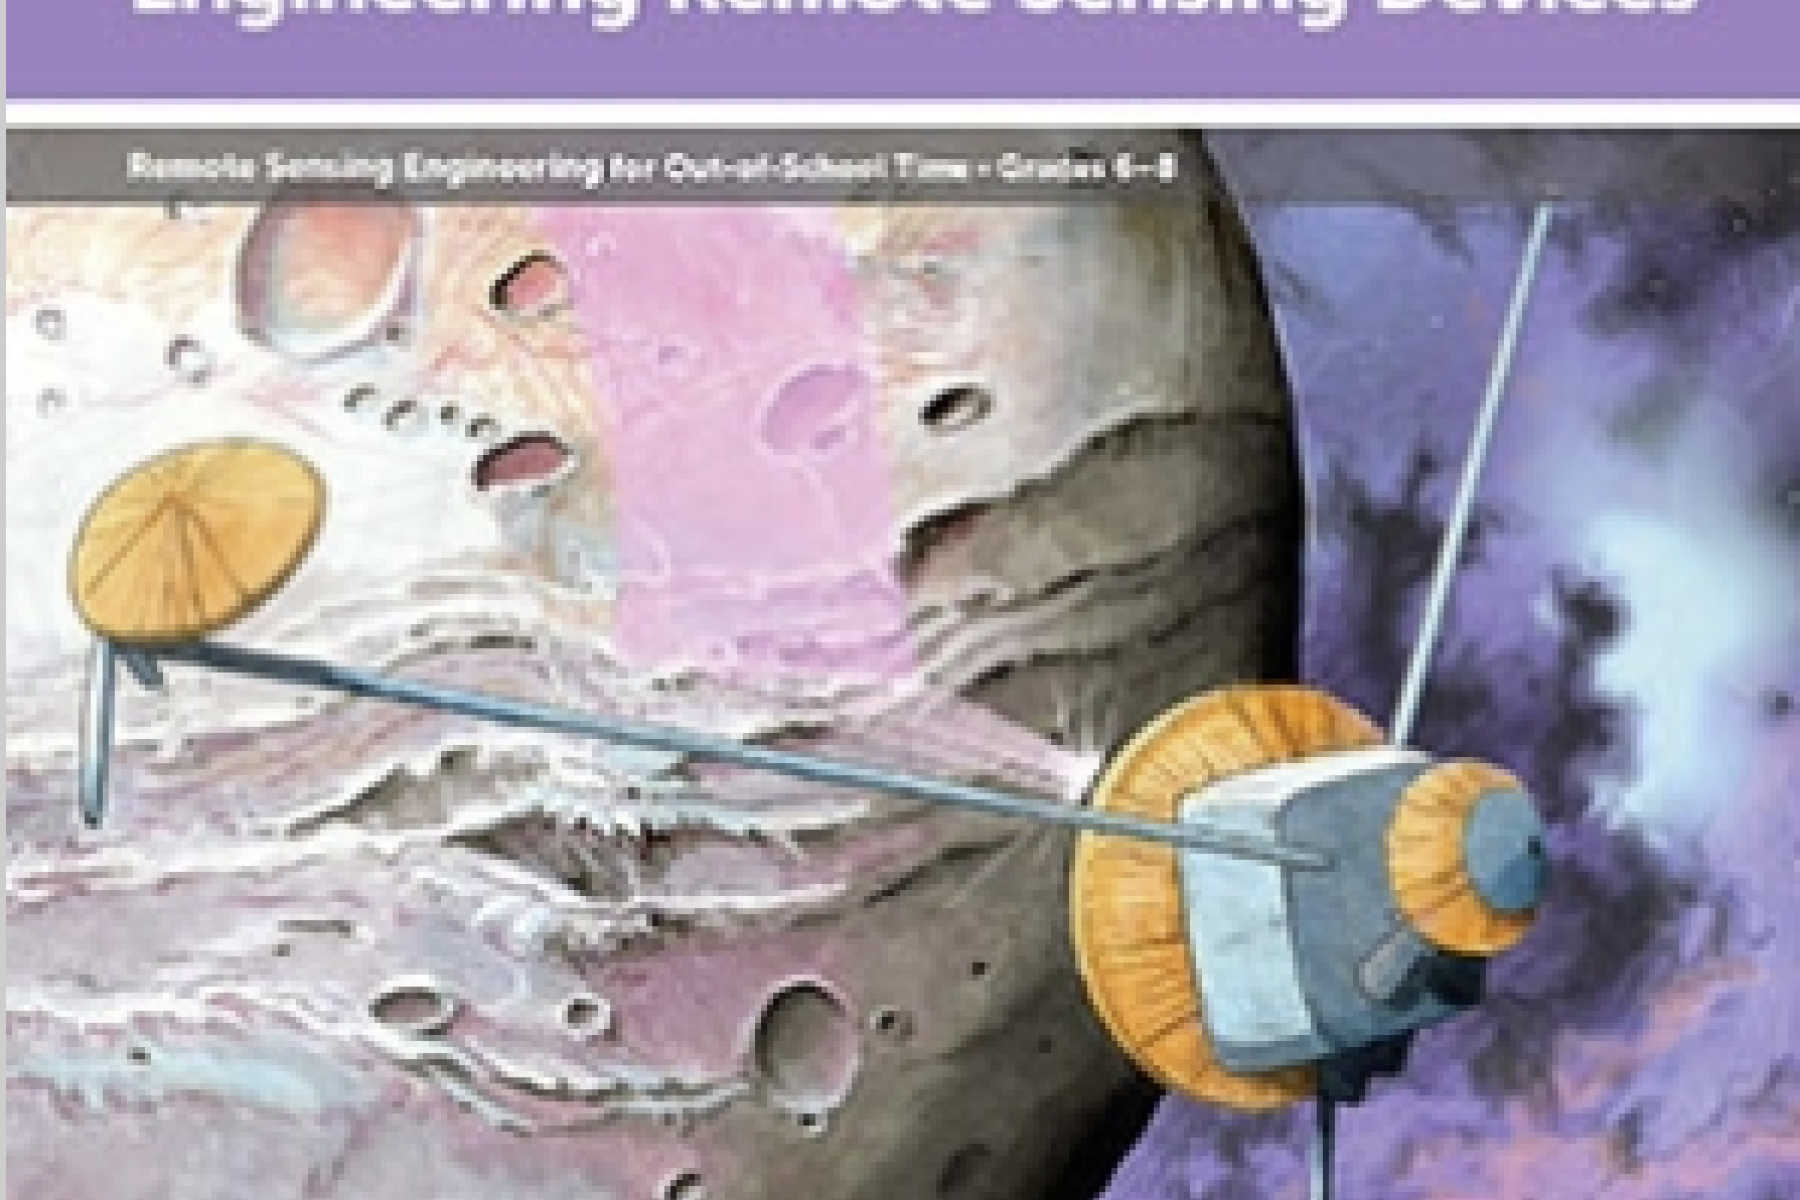 Image of a book cover featuring an illustration of a satellite observing a planet 